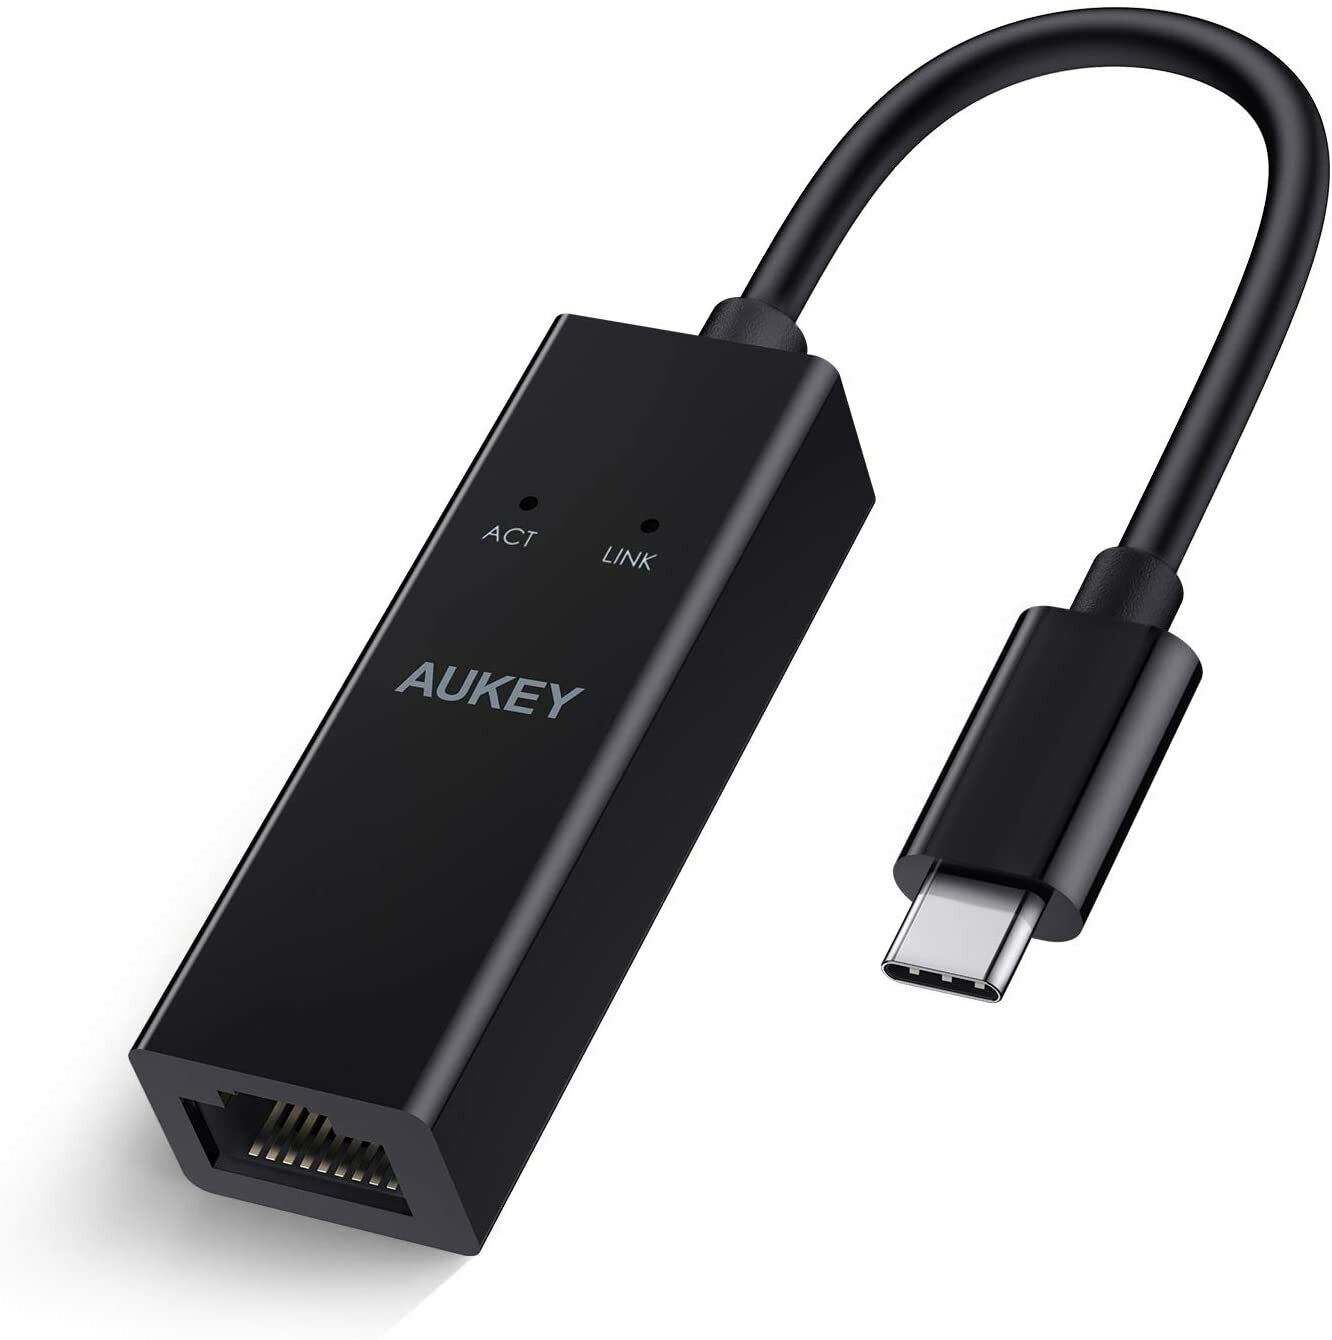 AUKEY USB-C to Ethernet Adapter, USB Type C Adapter Supporting 10/100/1000 Mbps